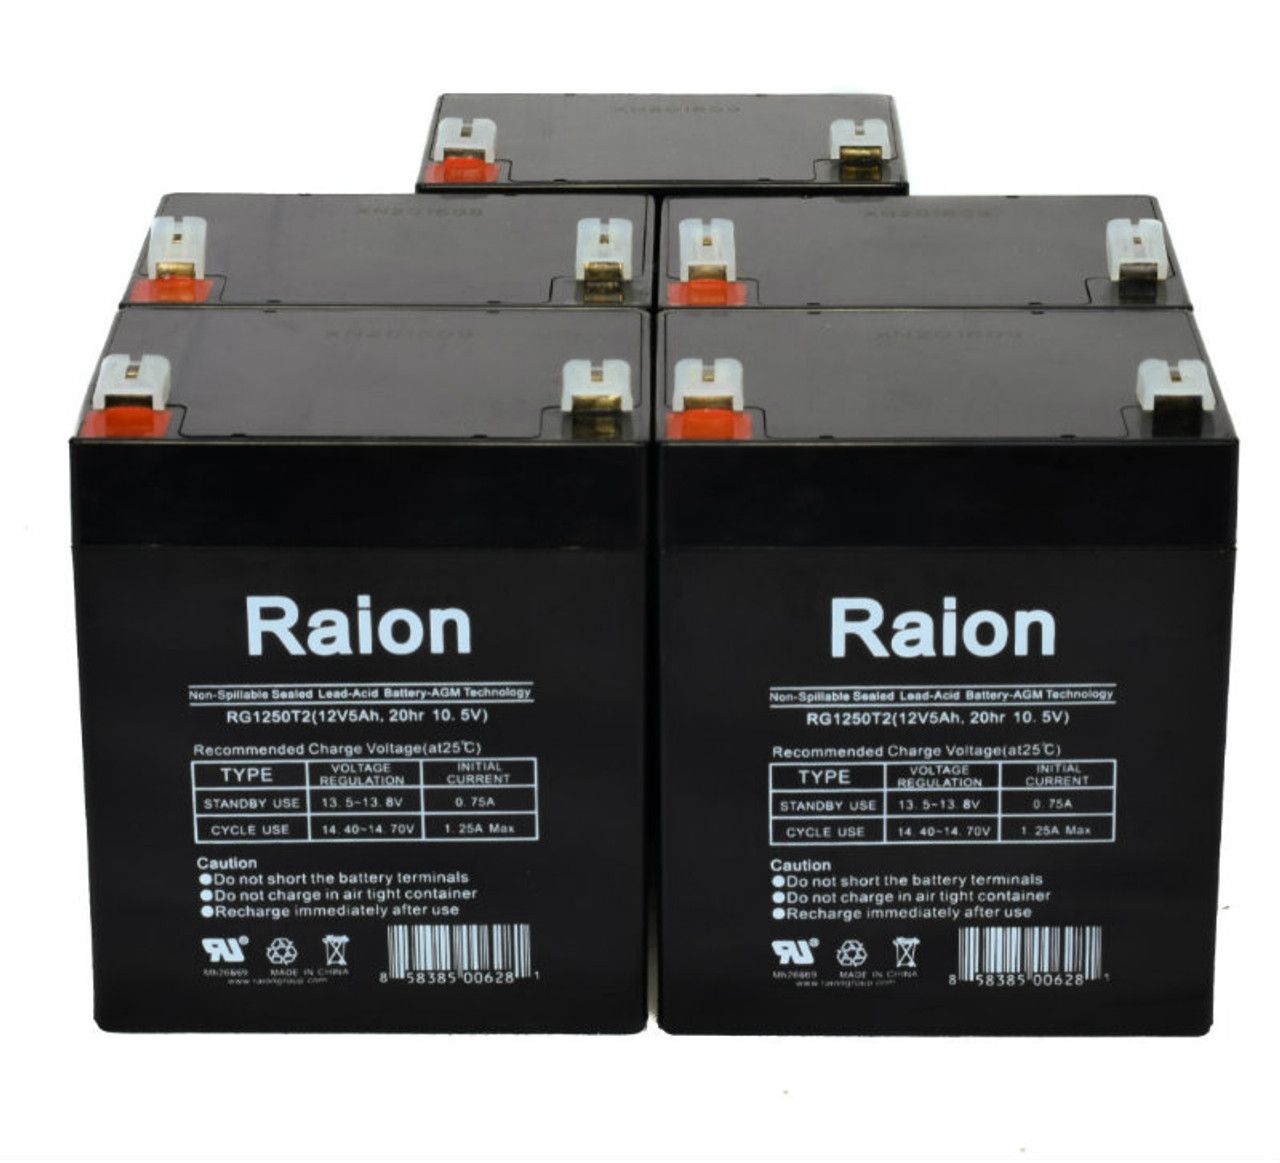 Raion Power 12V 5Ah RG1250T2 Replacement Lead Acid Battery for Fengri 6-FM-4.5 - 5 Pack